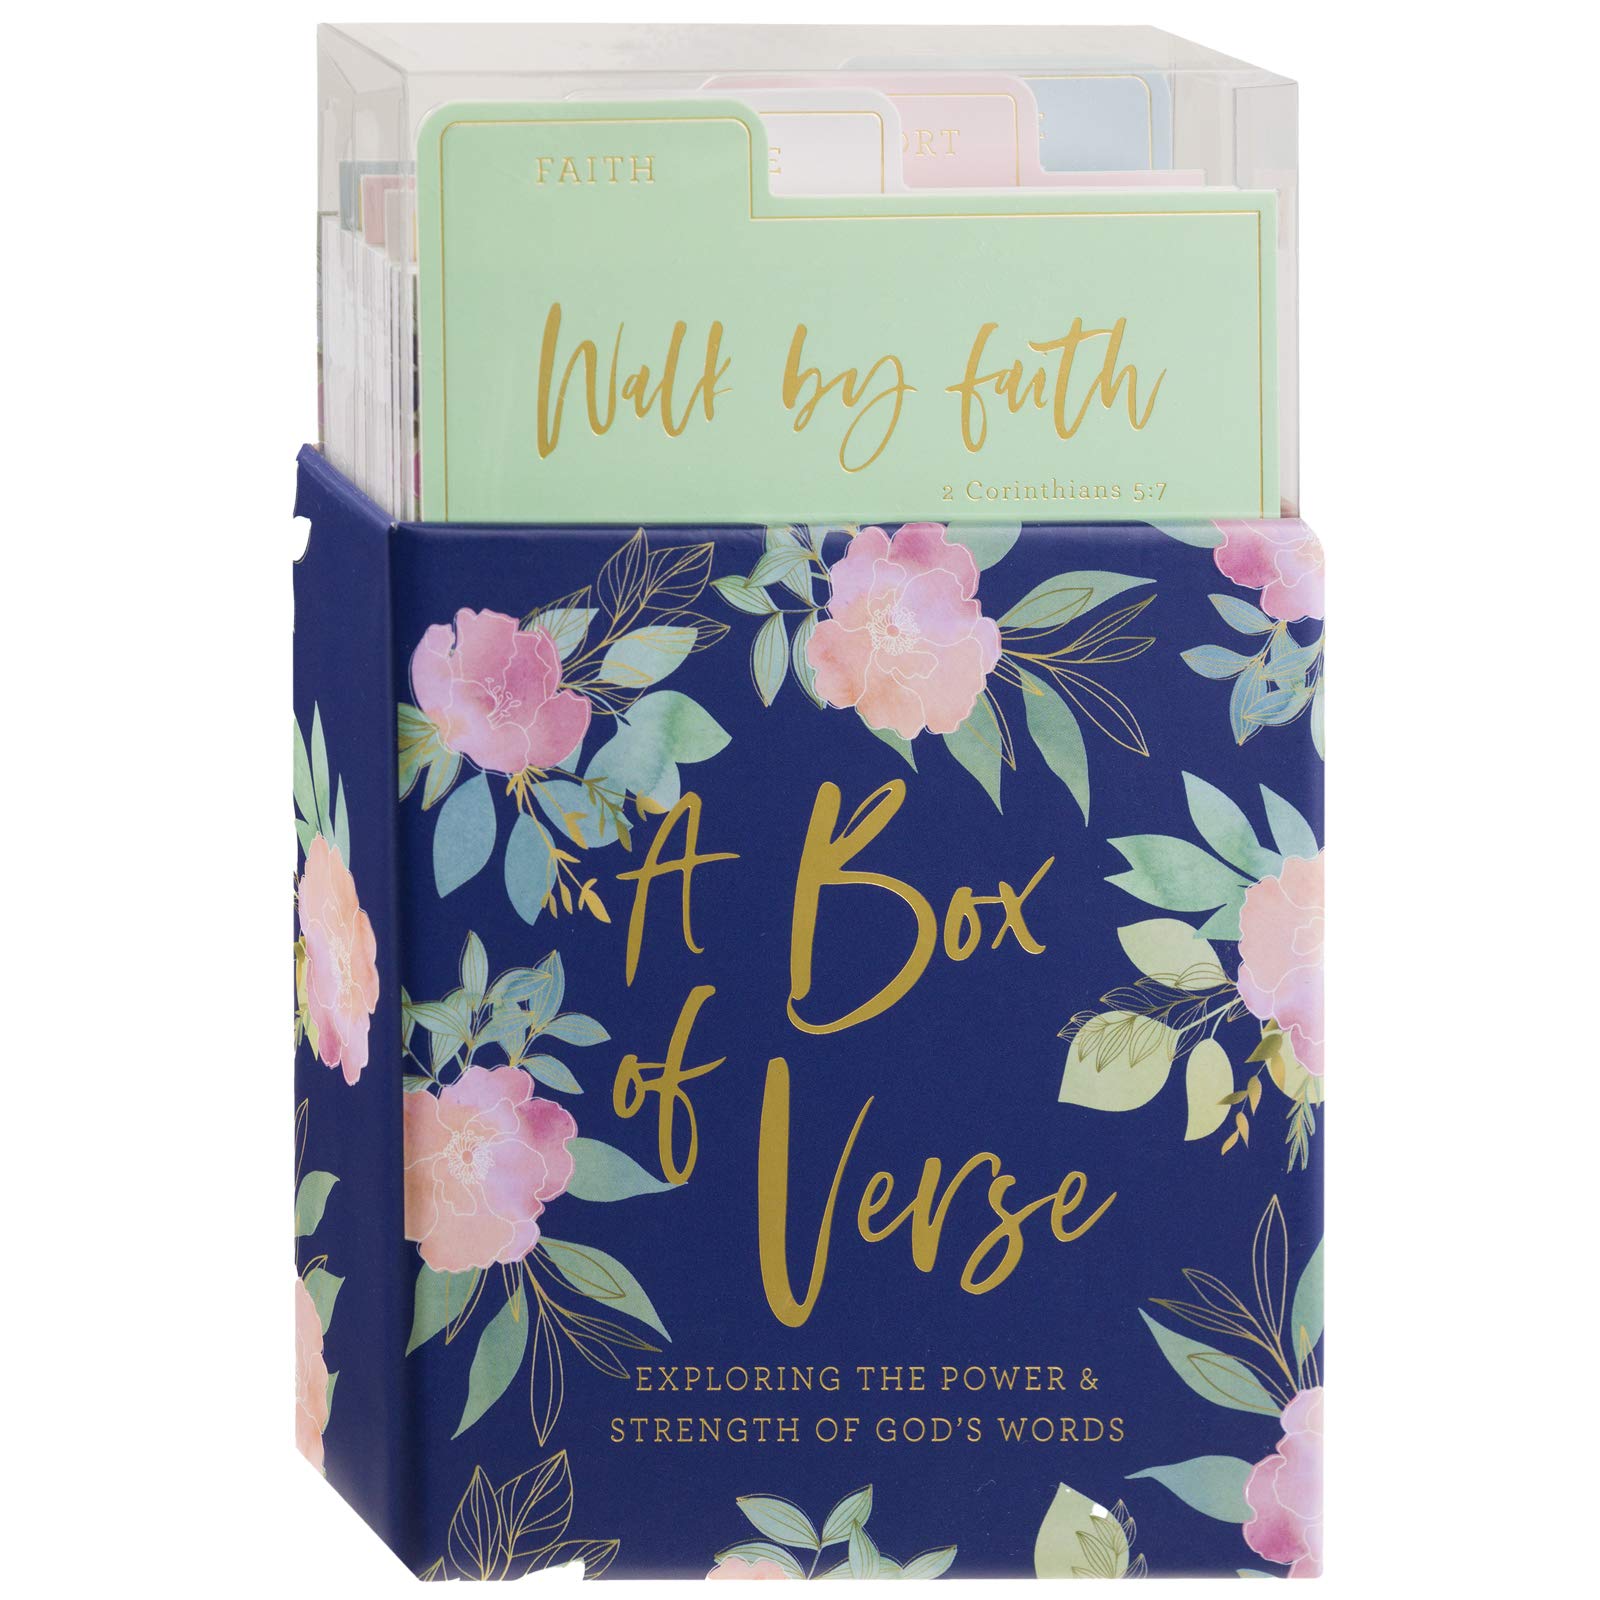 Eccolo Box of Verse 60 Scripture Cards Product Image